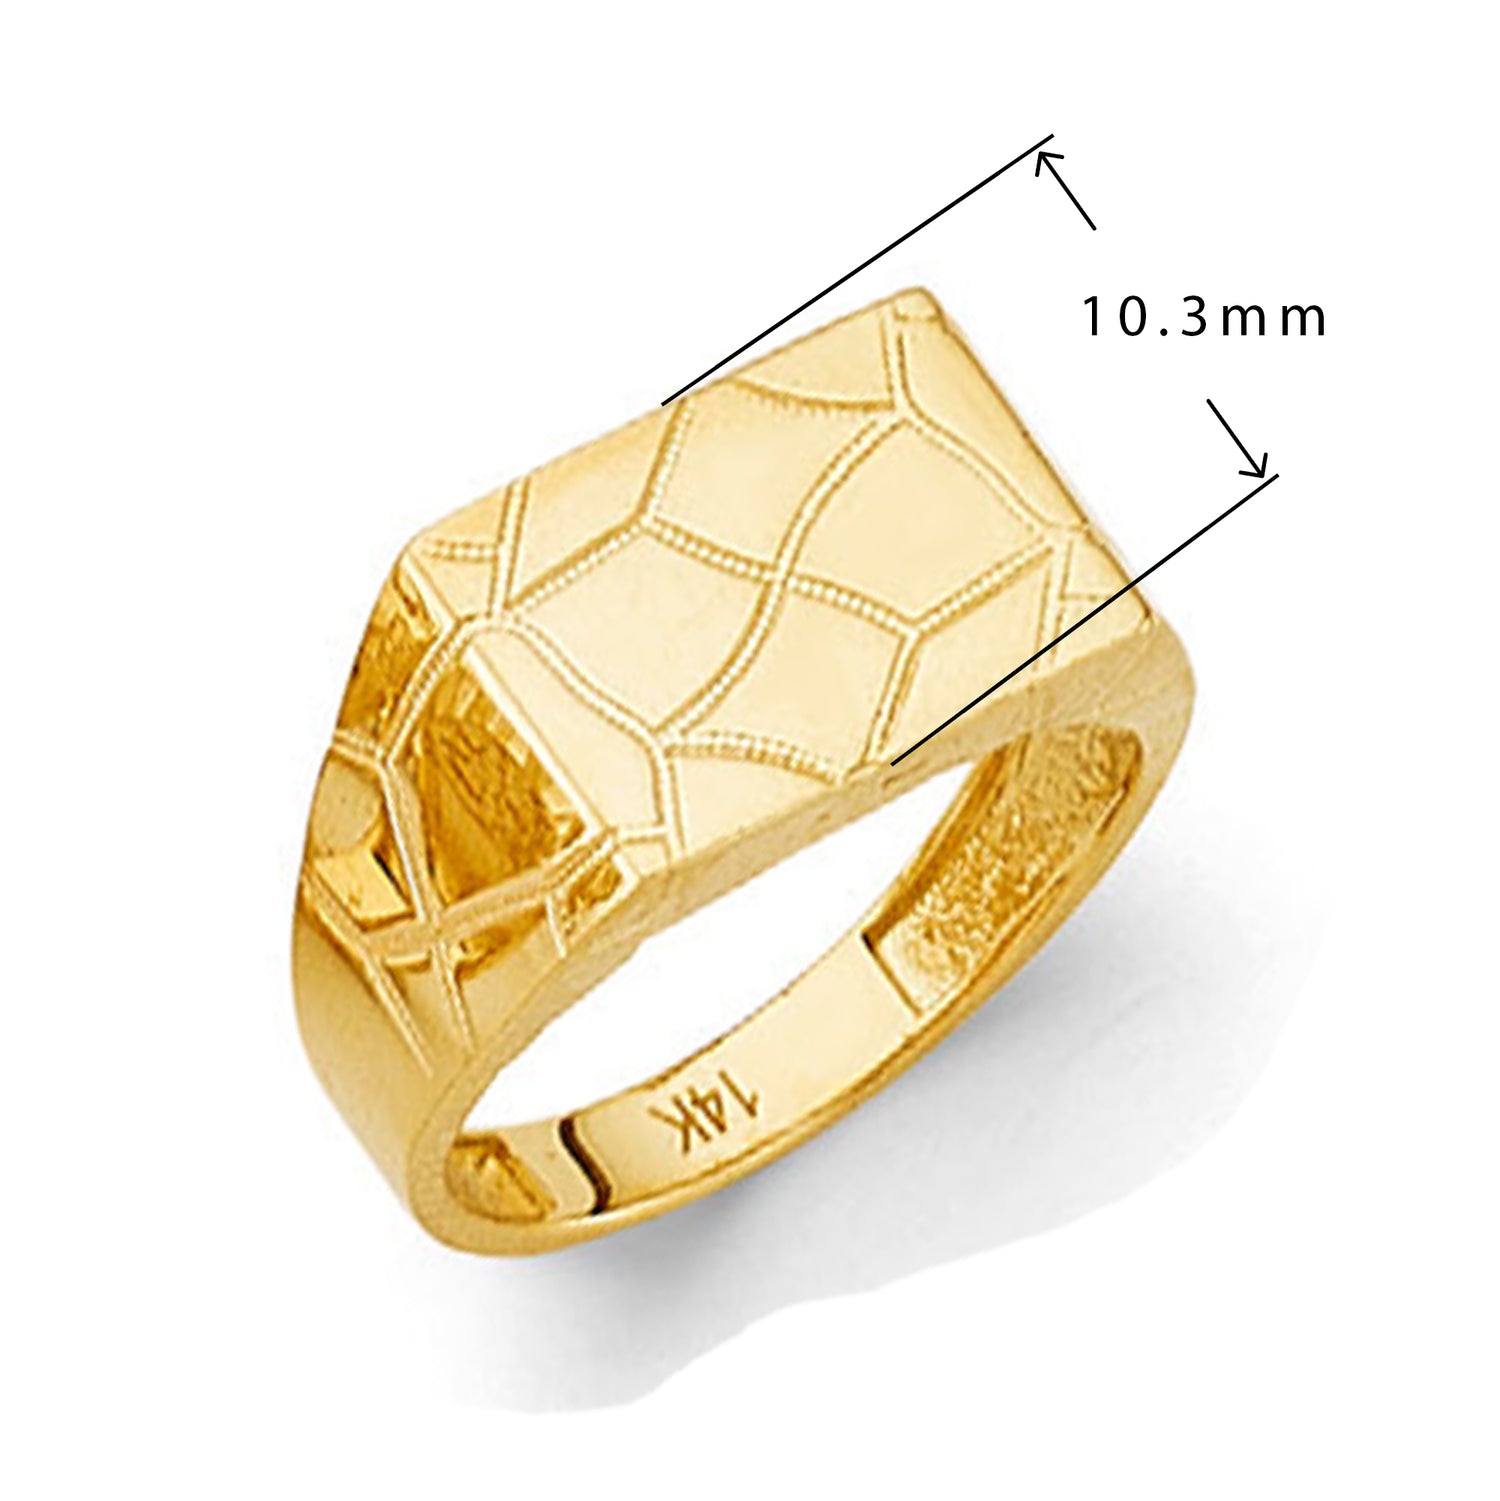 Trendy Rectangular Ring in Solid Gold with Measurement